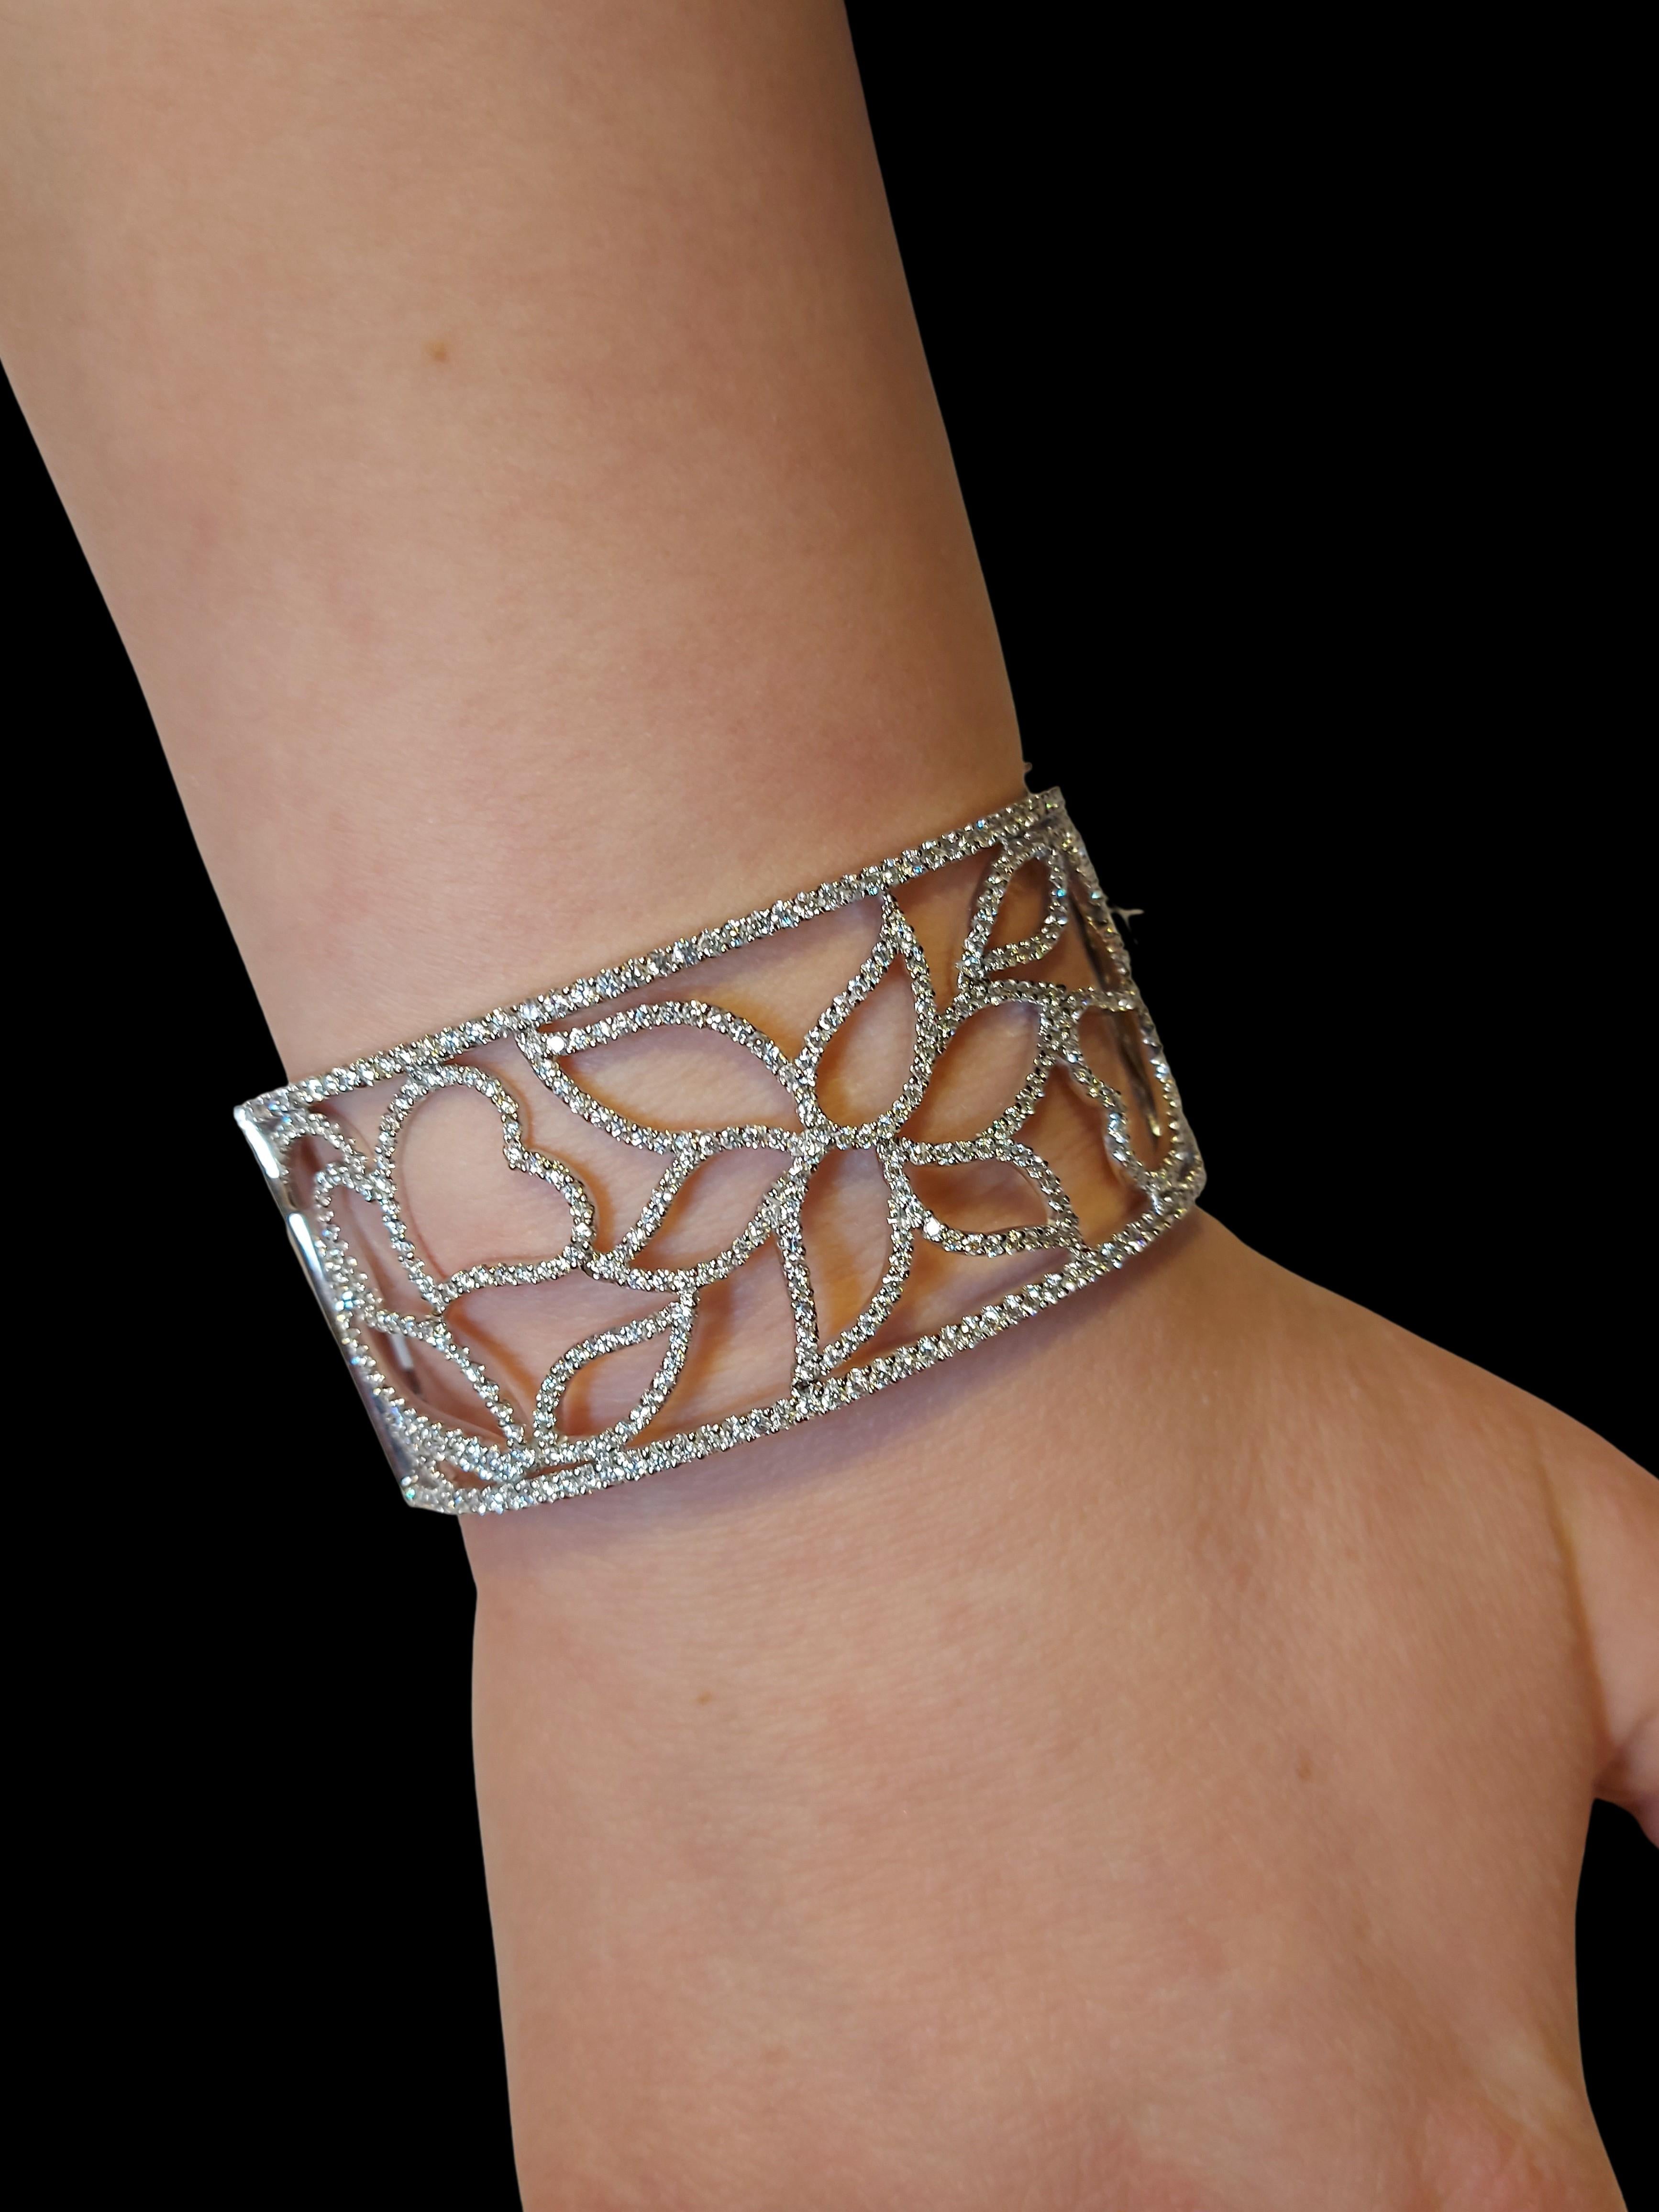 18kt White Gold Cuff Bracelet with 5.78ct Diamonds, 2 Sided Wearable For Sale 5